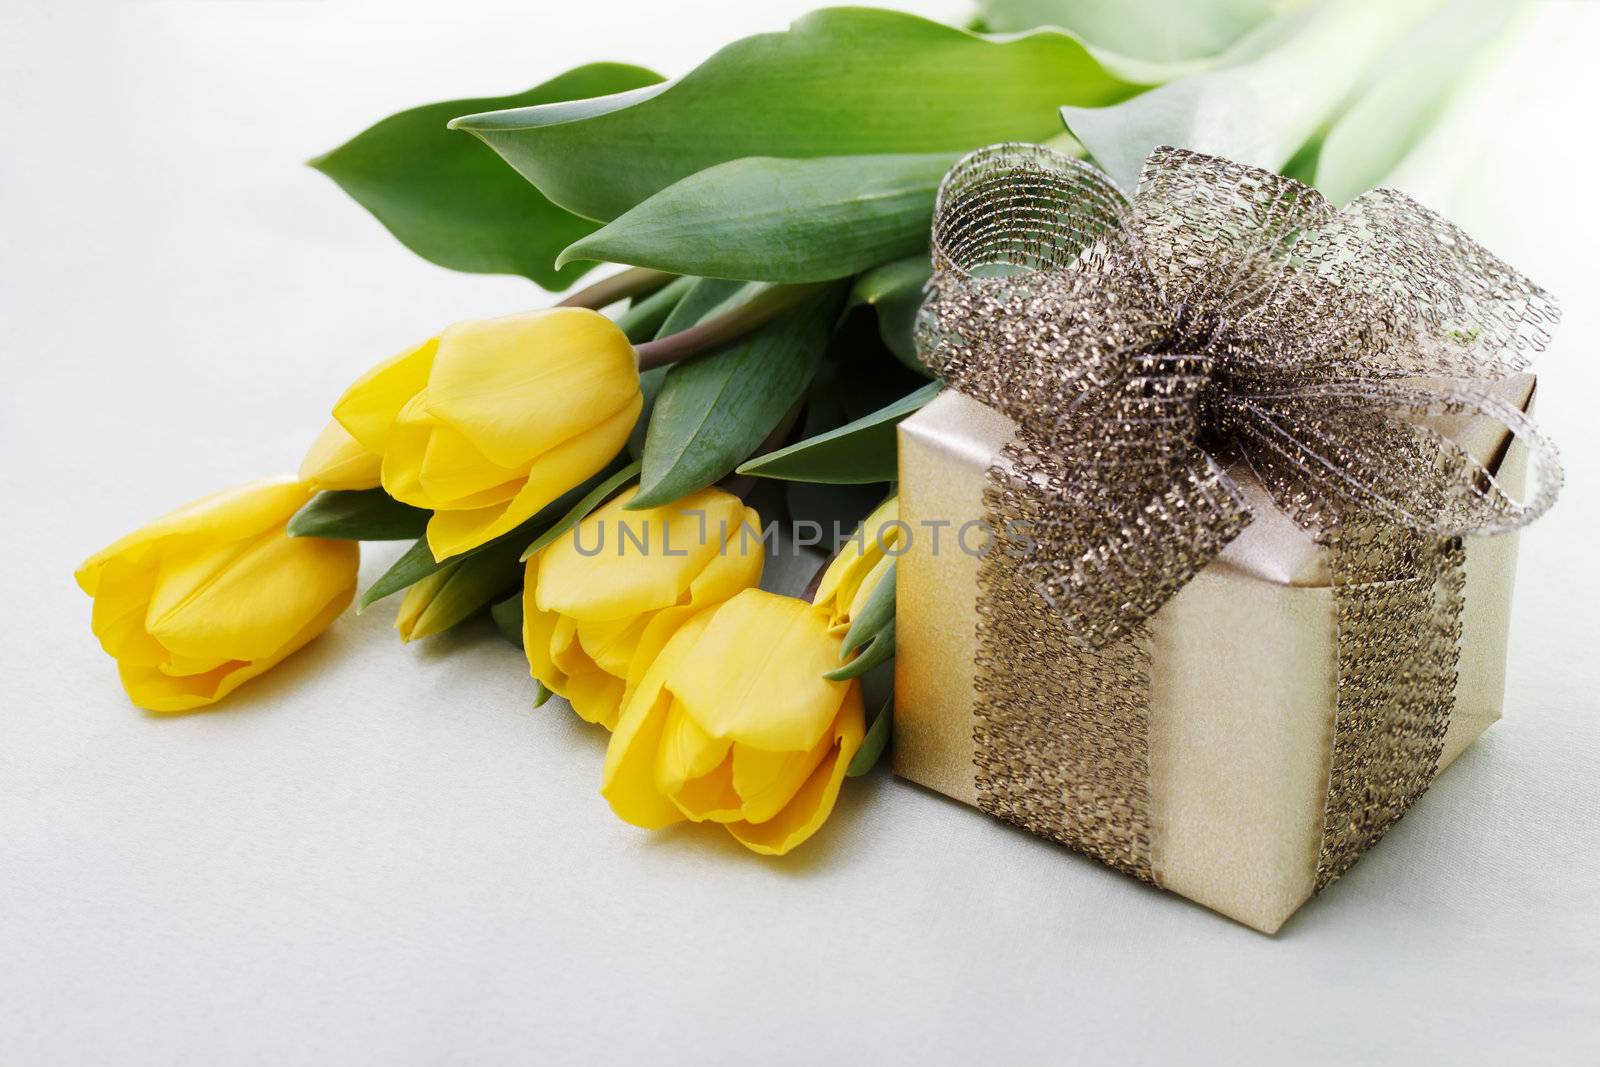 Tulips with Giftbox by melpomene